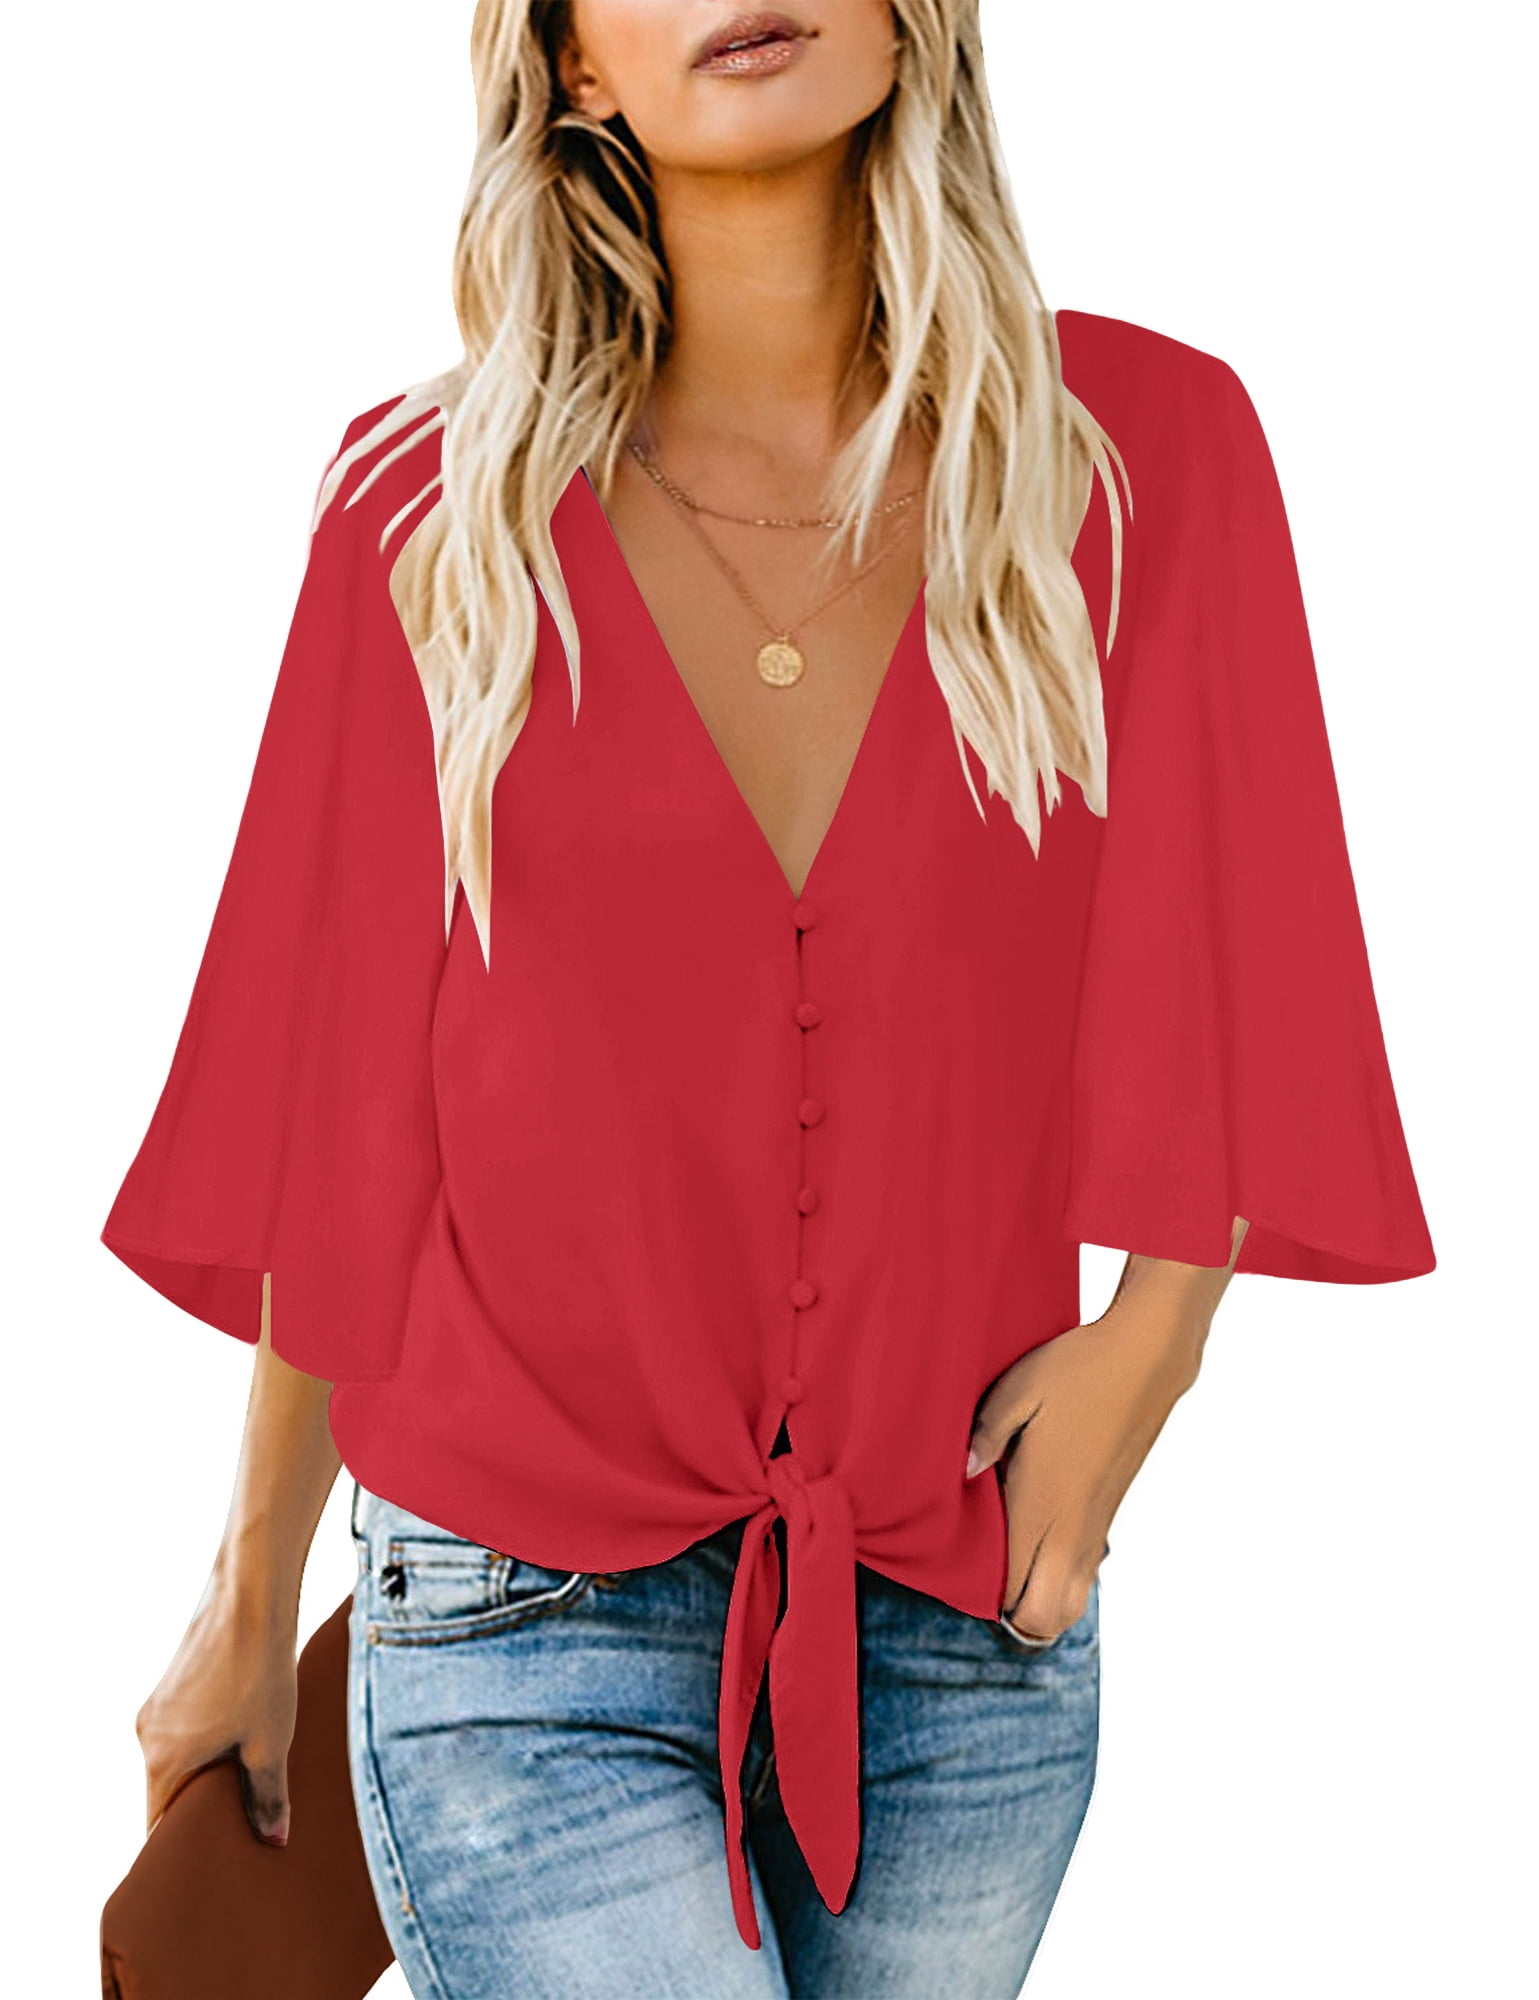 luvamia Women's Casual Sexy Tops Tie Front Blouses V Neck Summer Shirts ...